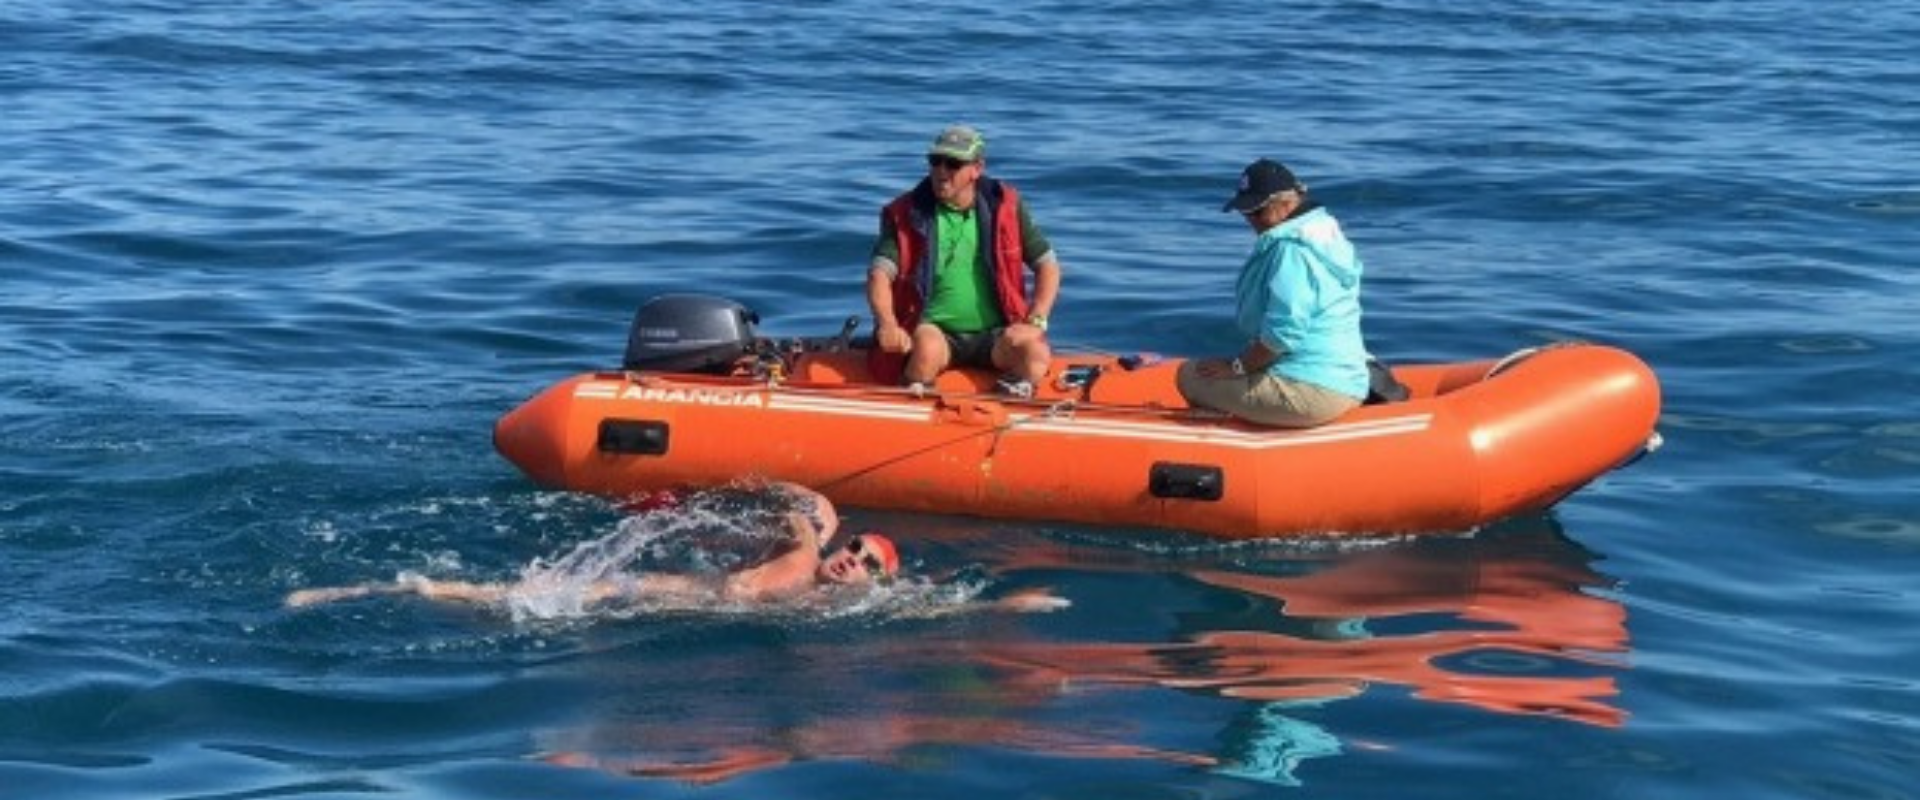 Marty swimming in the water in a red swimming cap and Zoggs Predator Goggles. Swimming next to a orange support boat with a man and woman seated in the boat